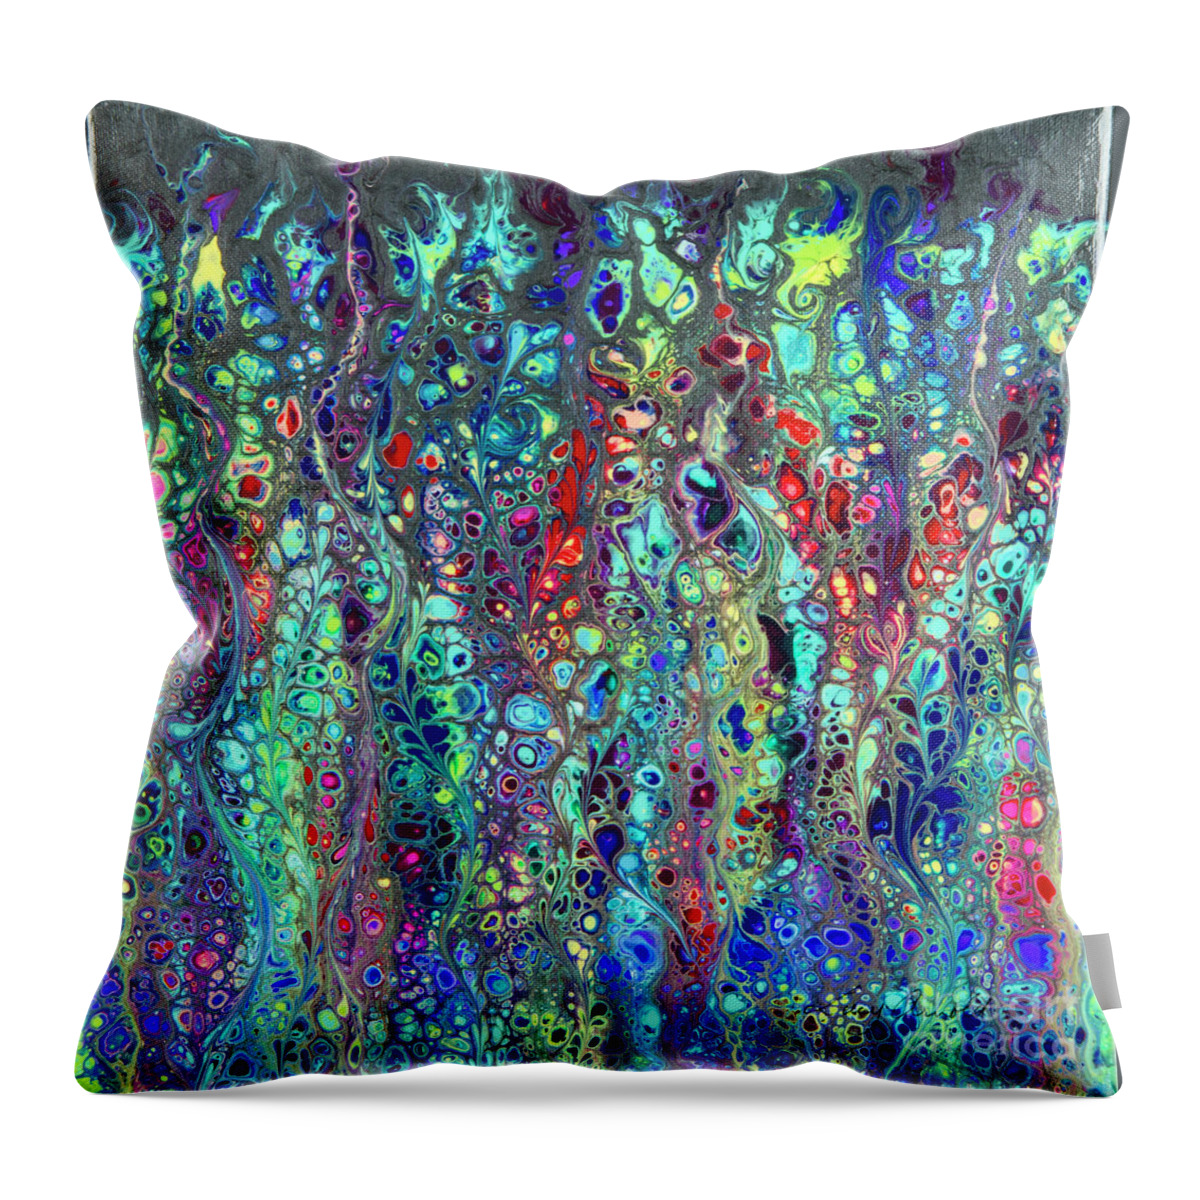 Poured Acrylics Throw Pillow featuring the painting Sorcerer's Garden by Lucy Arnold